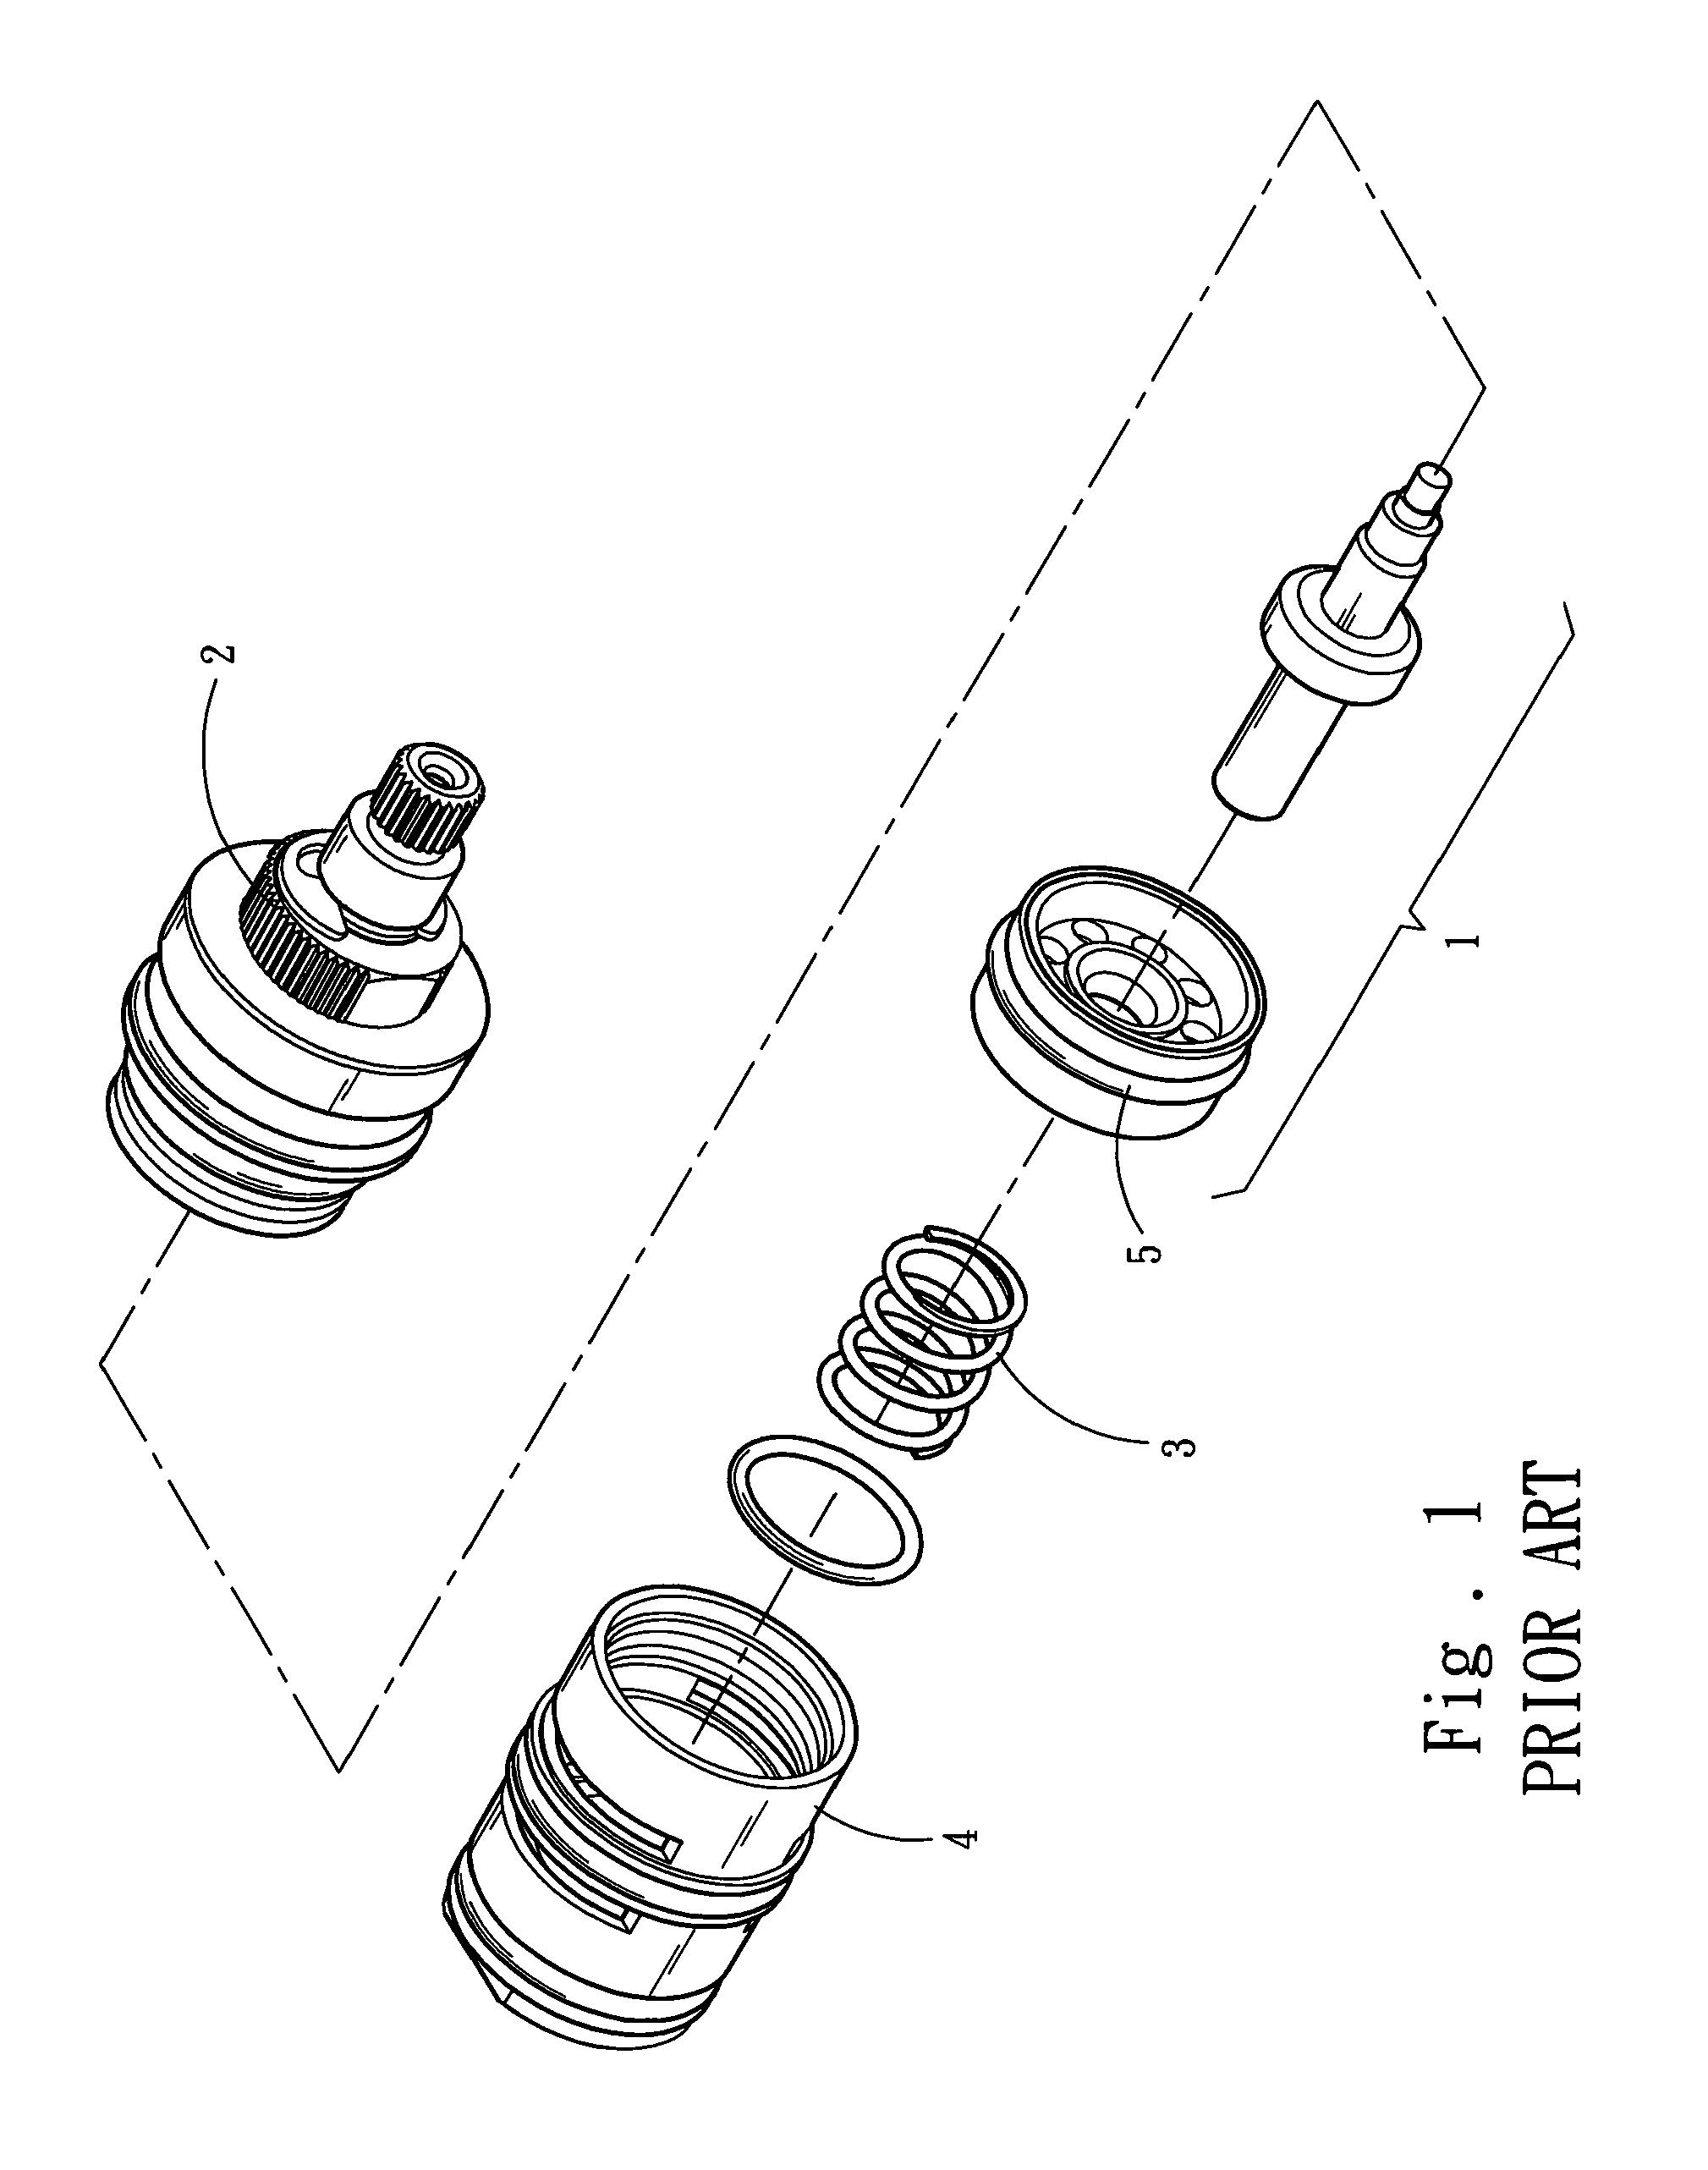 Thermostatic valve control structure